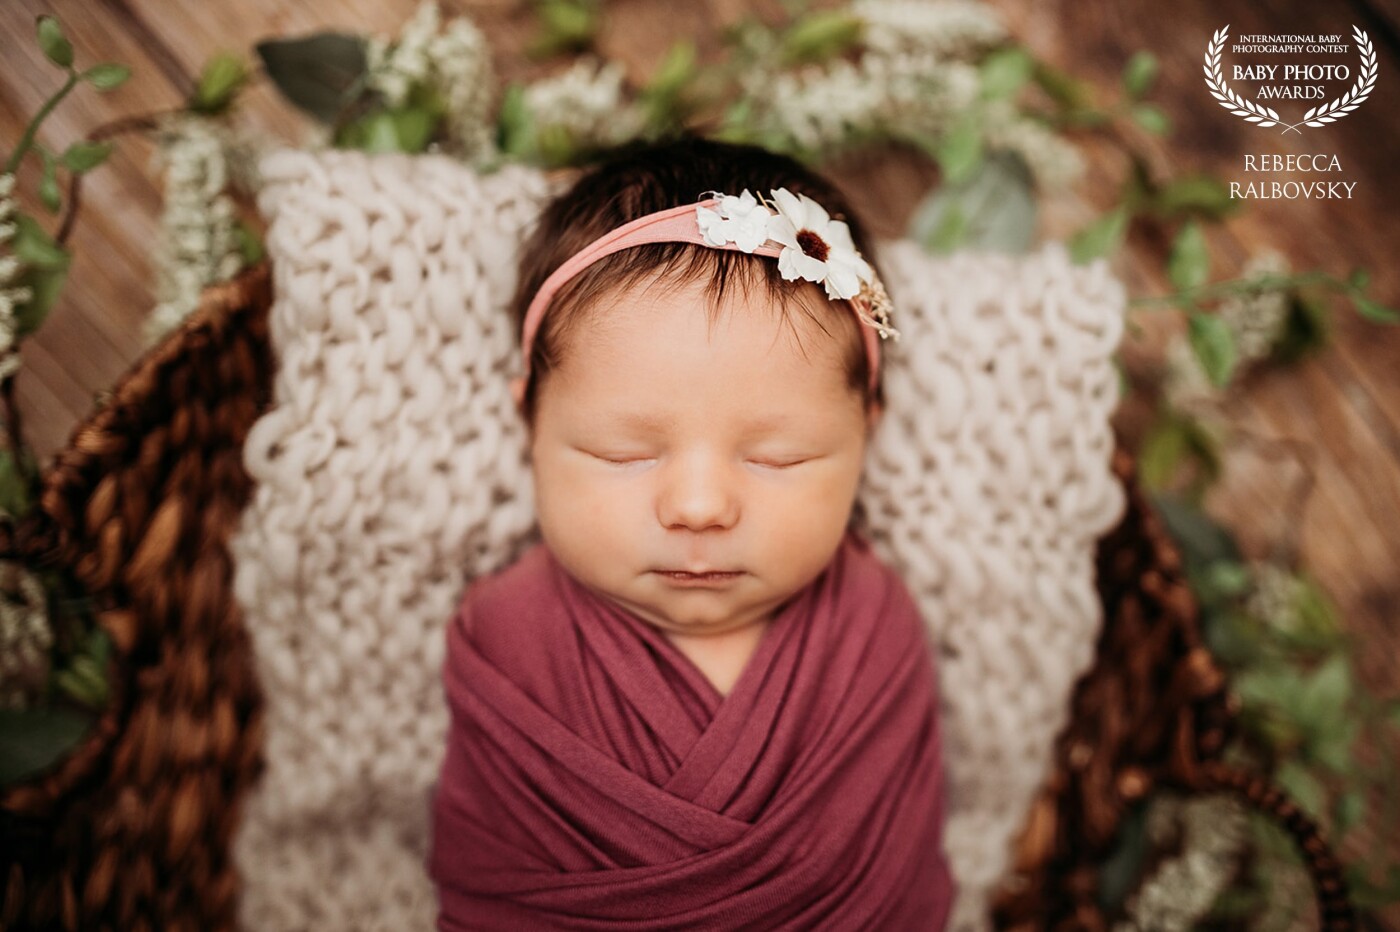 This is my own little girl, and being able to be the photographer for her milestones and newborn photos has been an absolute joy! I look at this photo and think, this is her. She's peaceful, beautiful, a happy/content little one. I love newborn photography in general, but this being my own baby makes it that much sweeter!